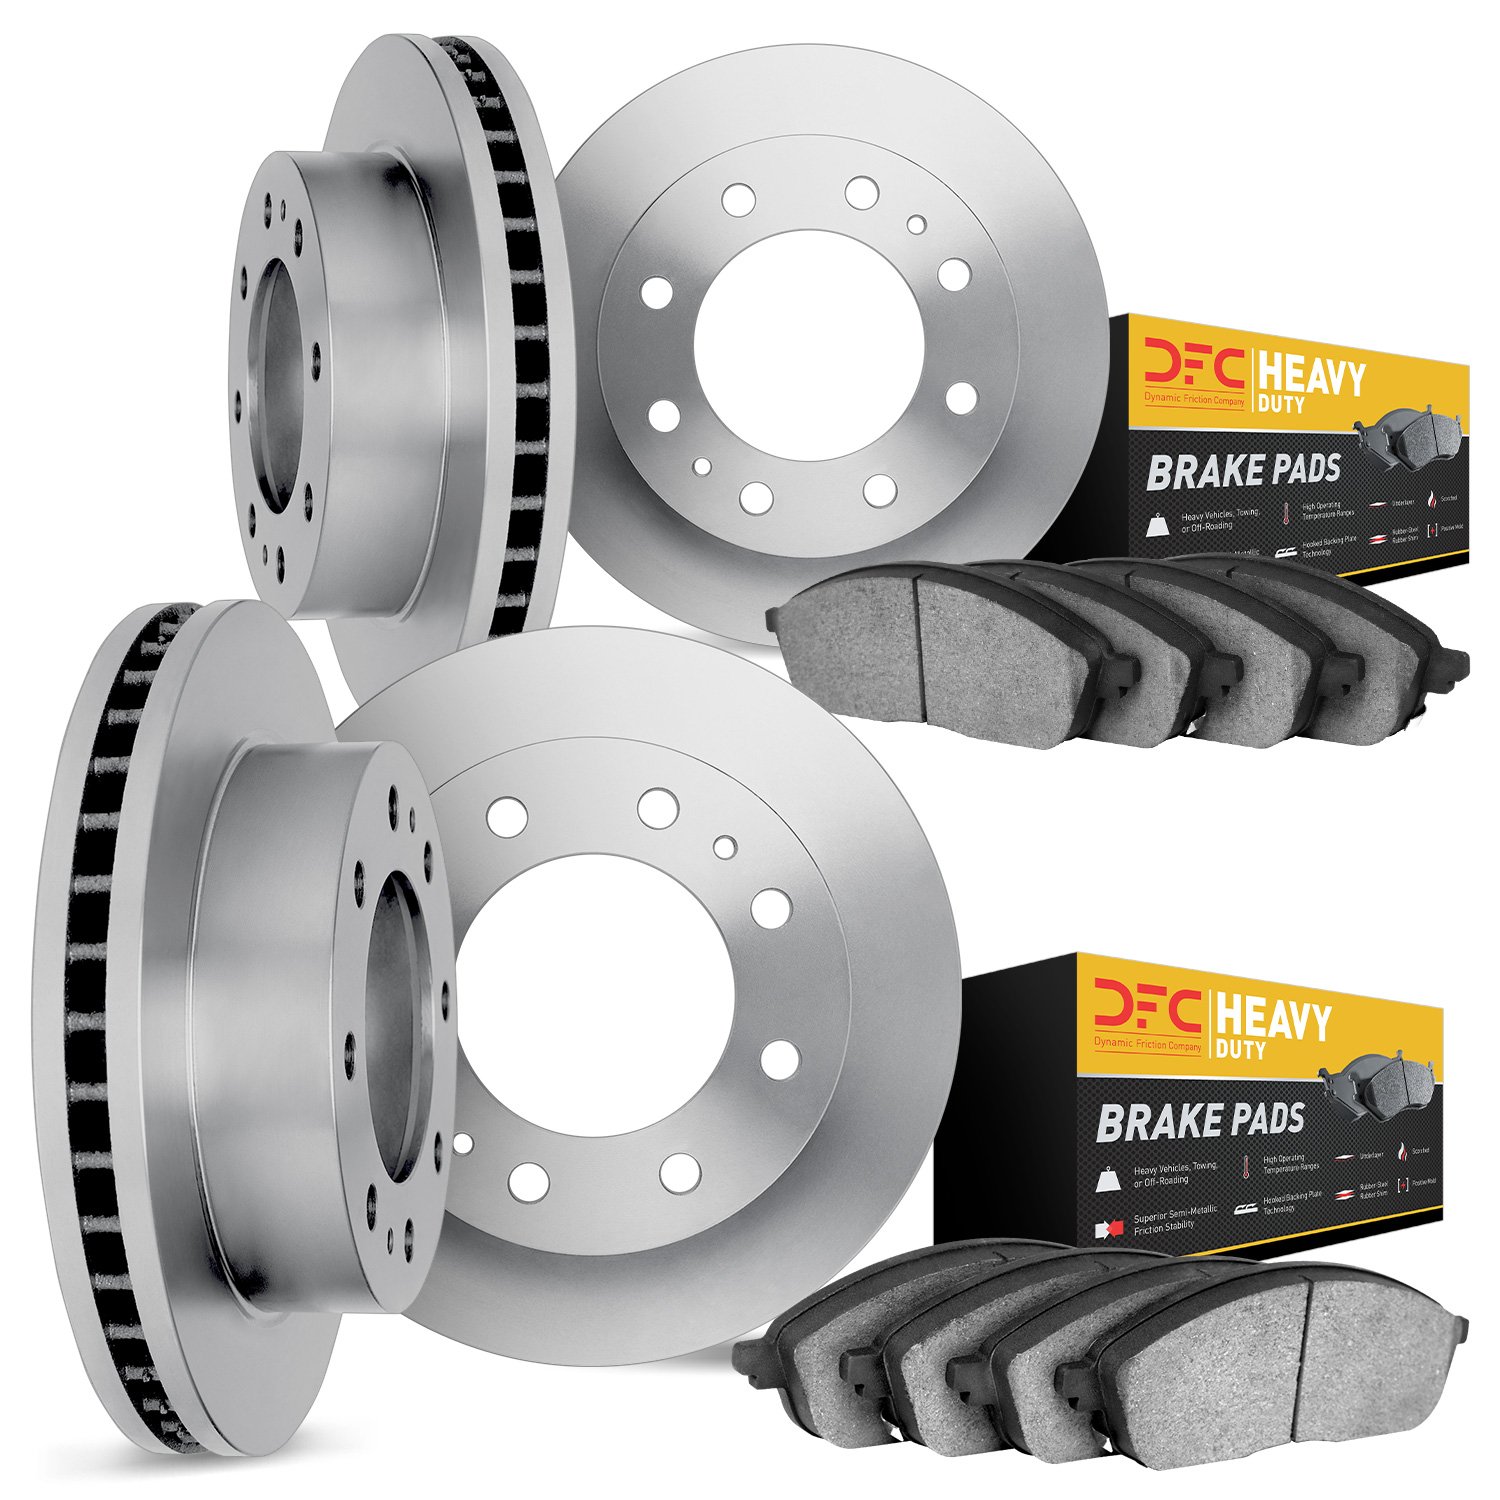 6204-48486 Brake Rotors w/Heavy-Duty Brake Pads Kit, 2009-2020 GM, Position: Front and Rear